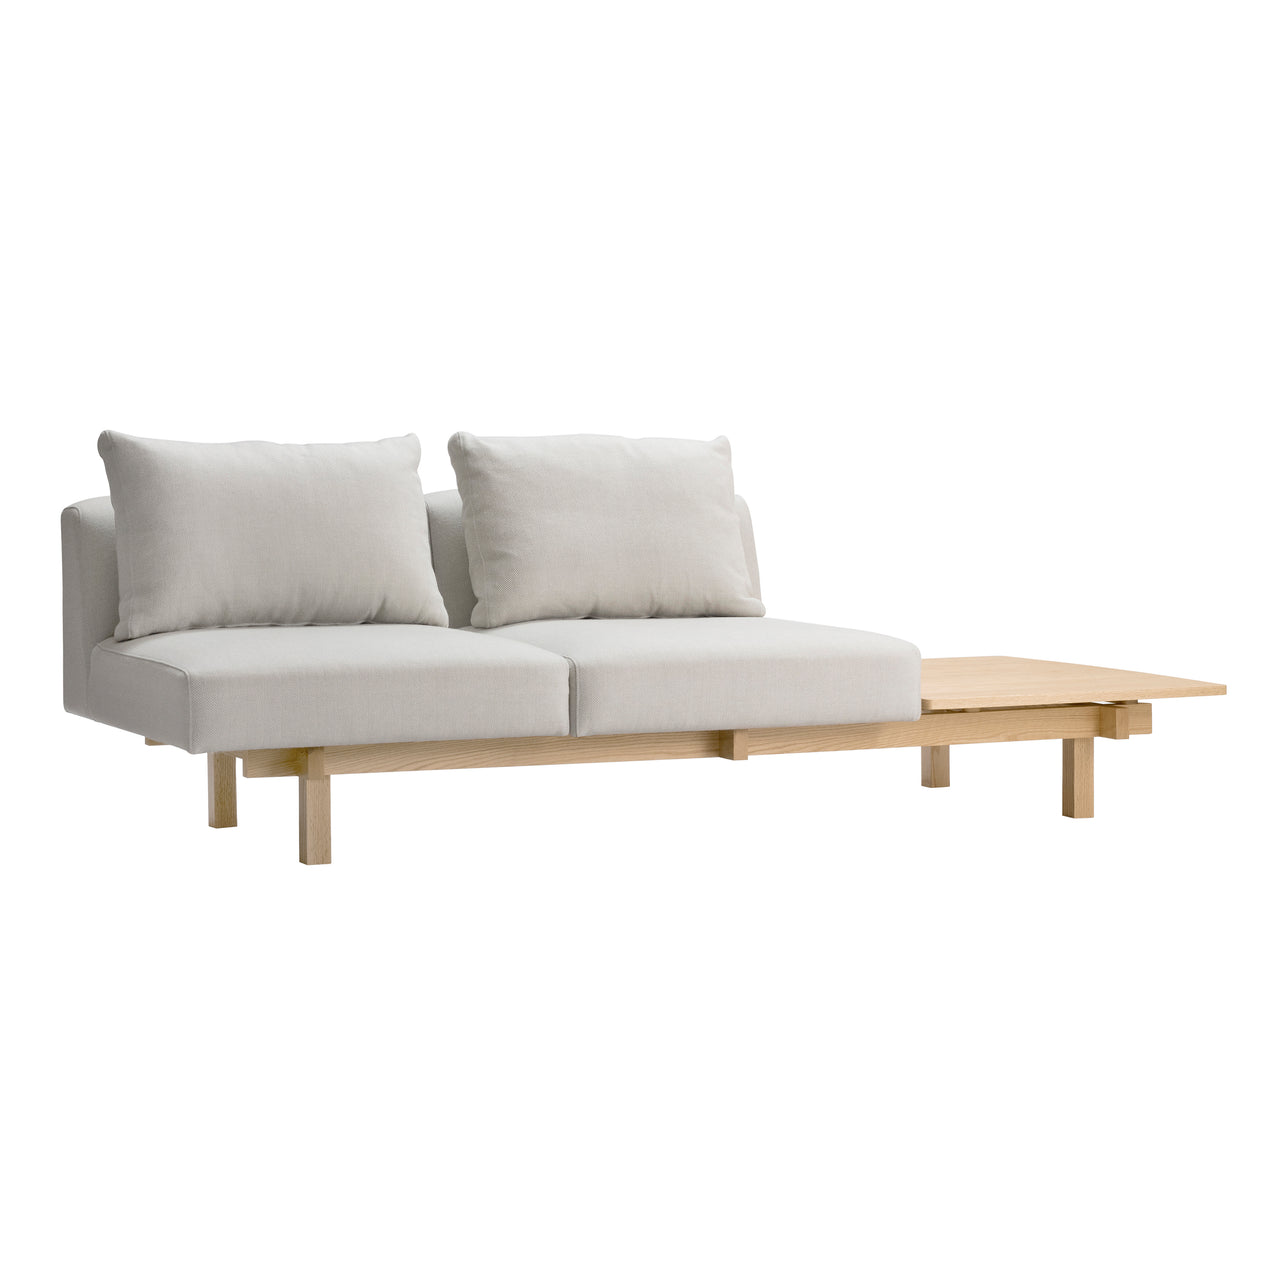 Raft Sofa 2 Seater with Table: White Oak + Fiord2 121